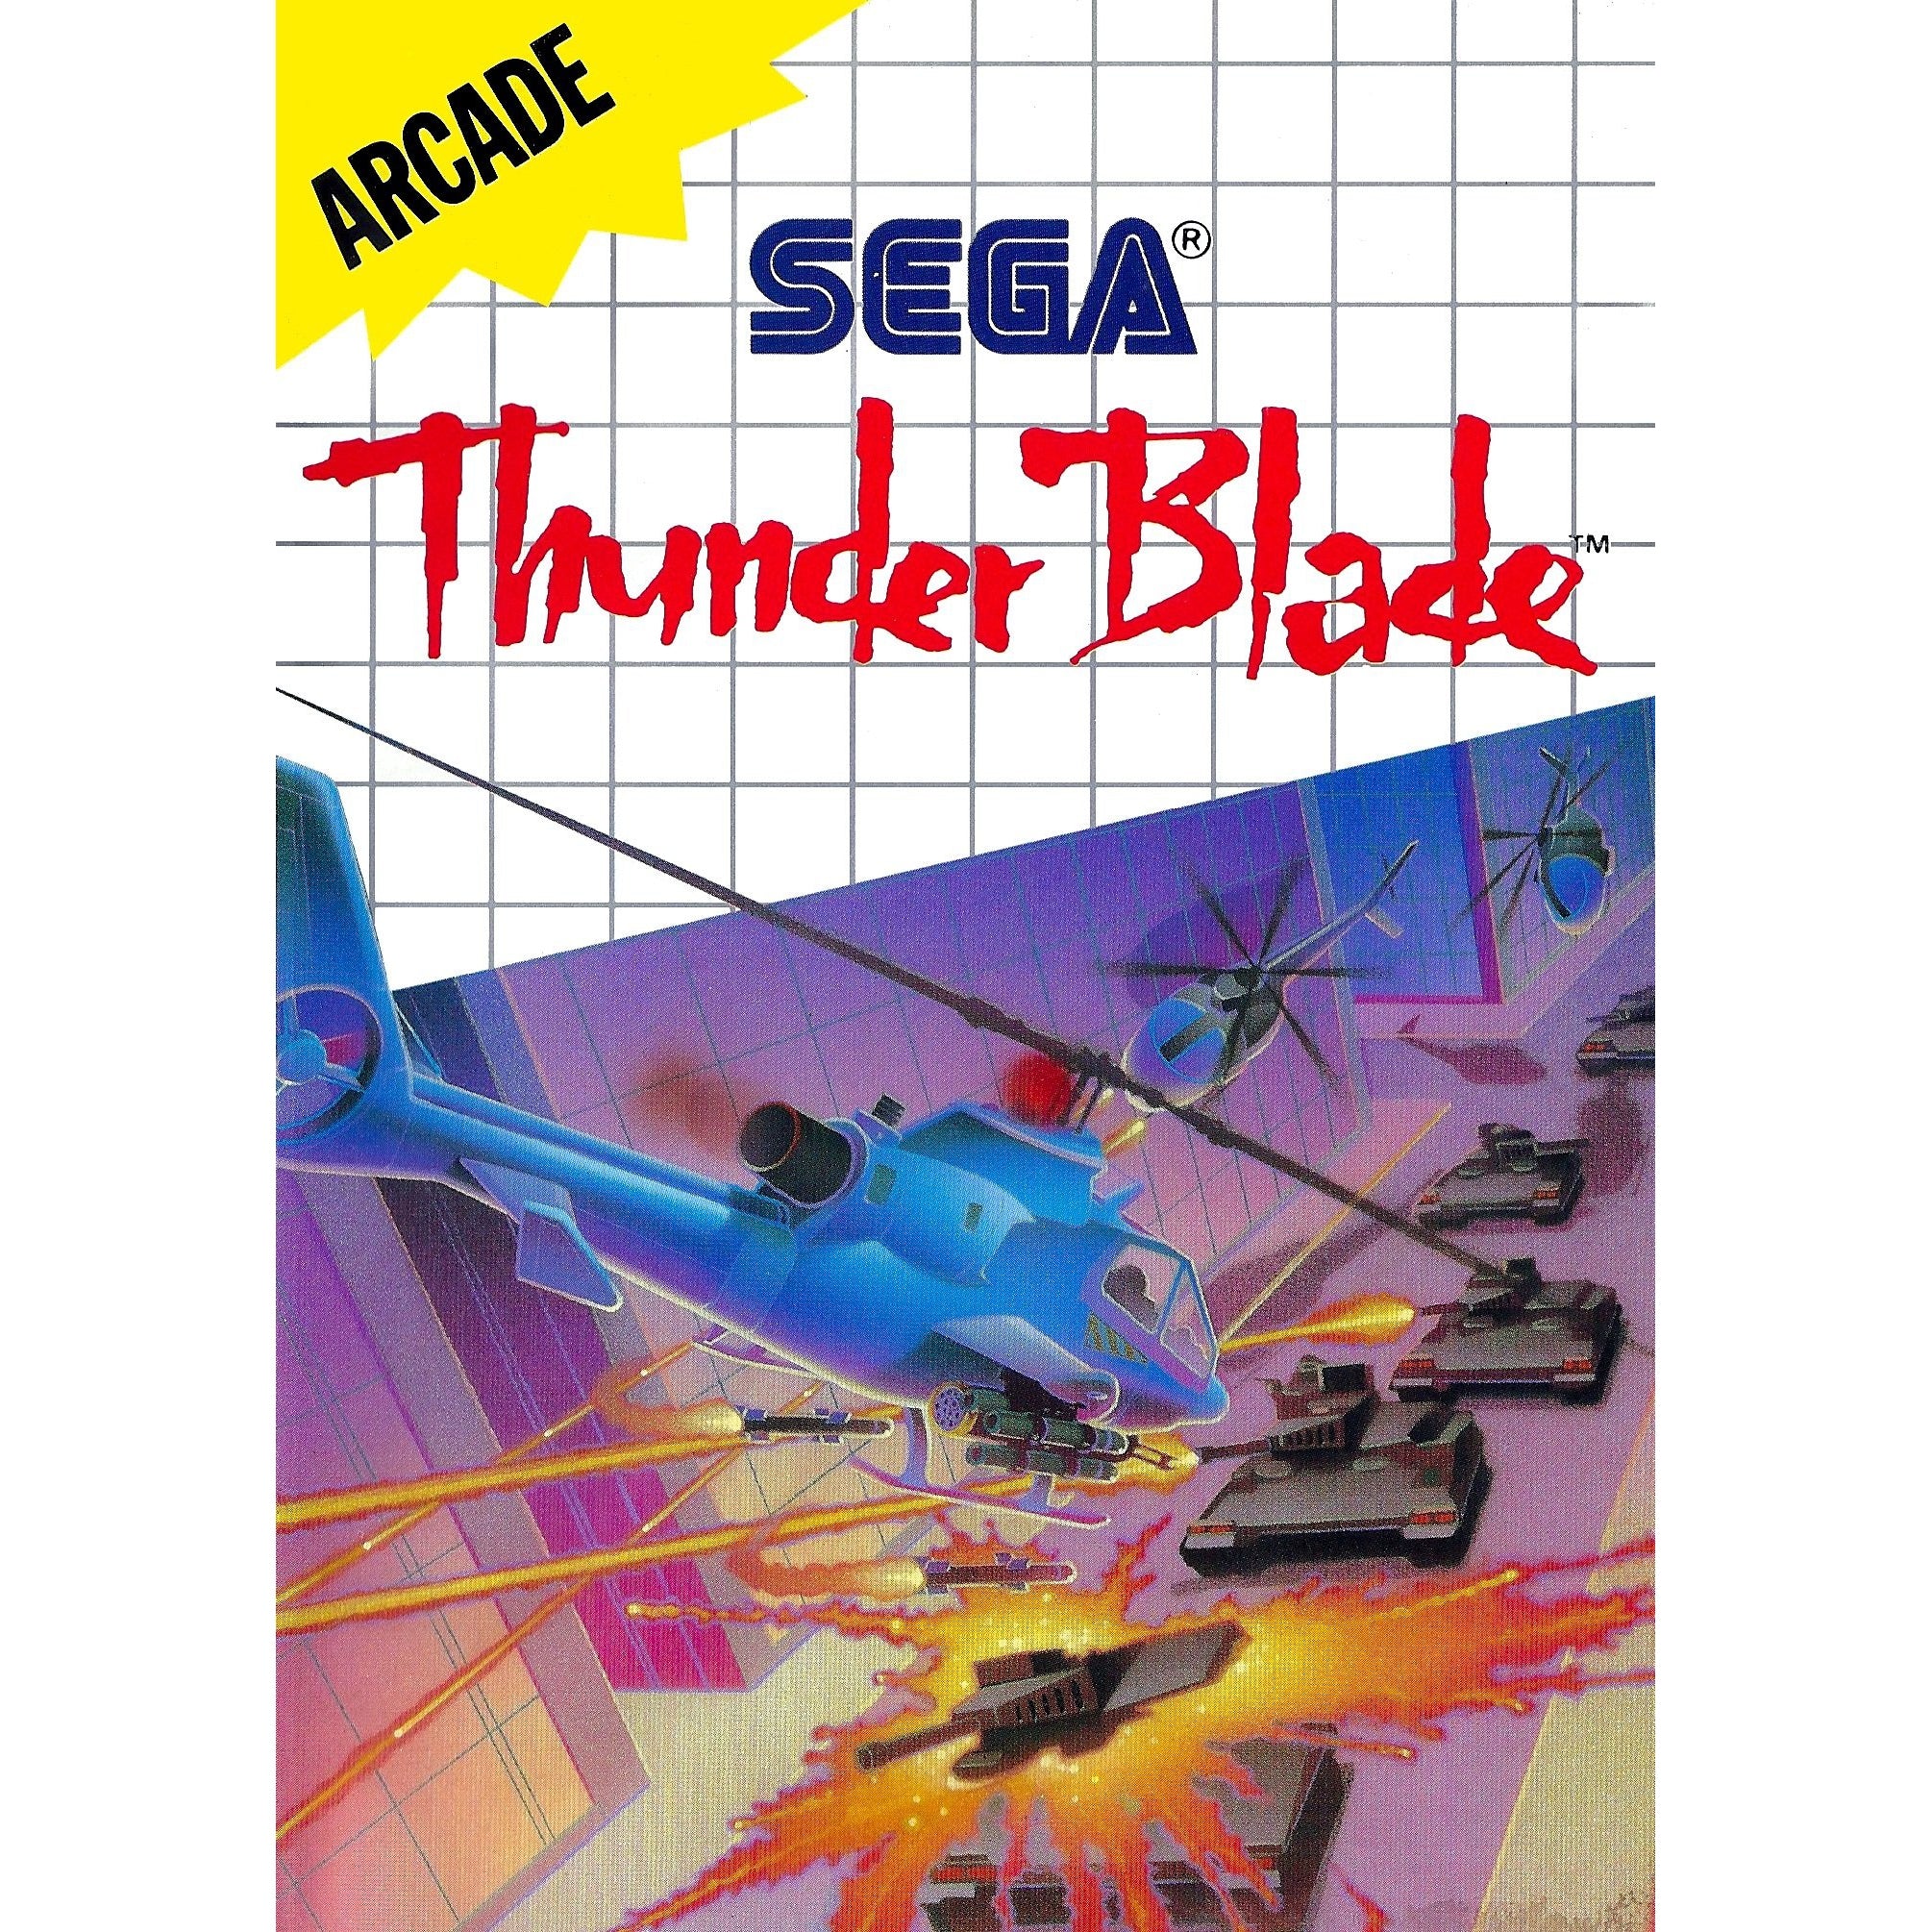 Thunder Blade - Sega Master System Game Complete - YourGamingShop.com - Buy, Sell, Trade Video Games Online. 120 Day Warranty. Satisfaction Guaranteed.